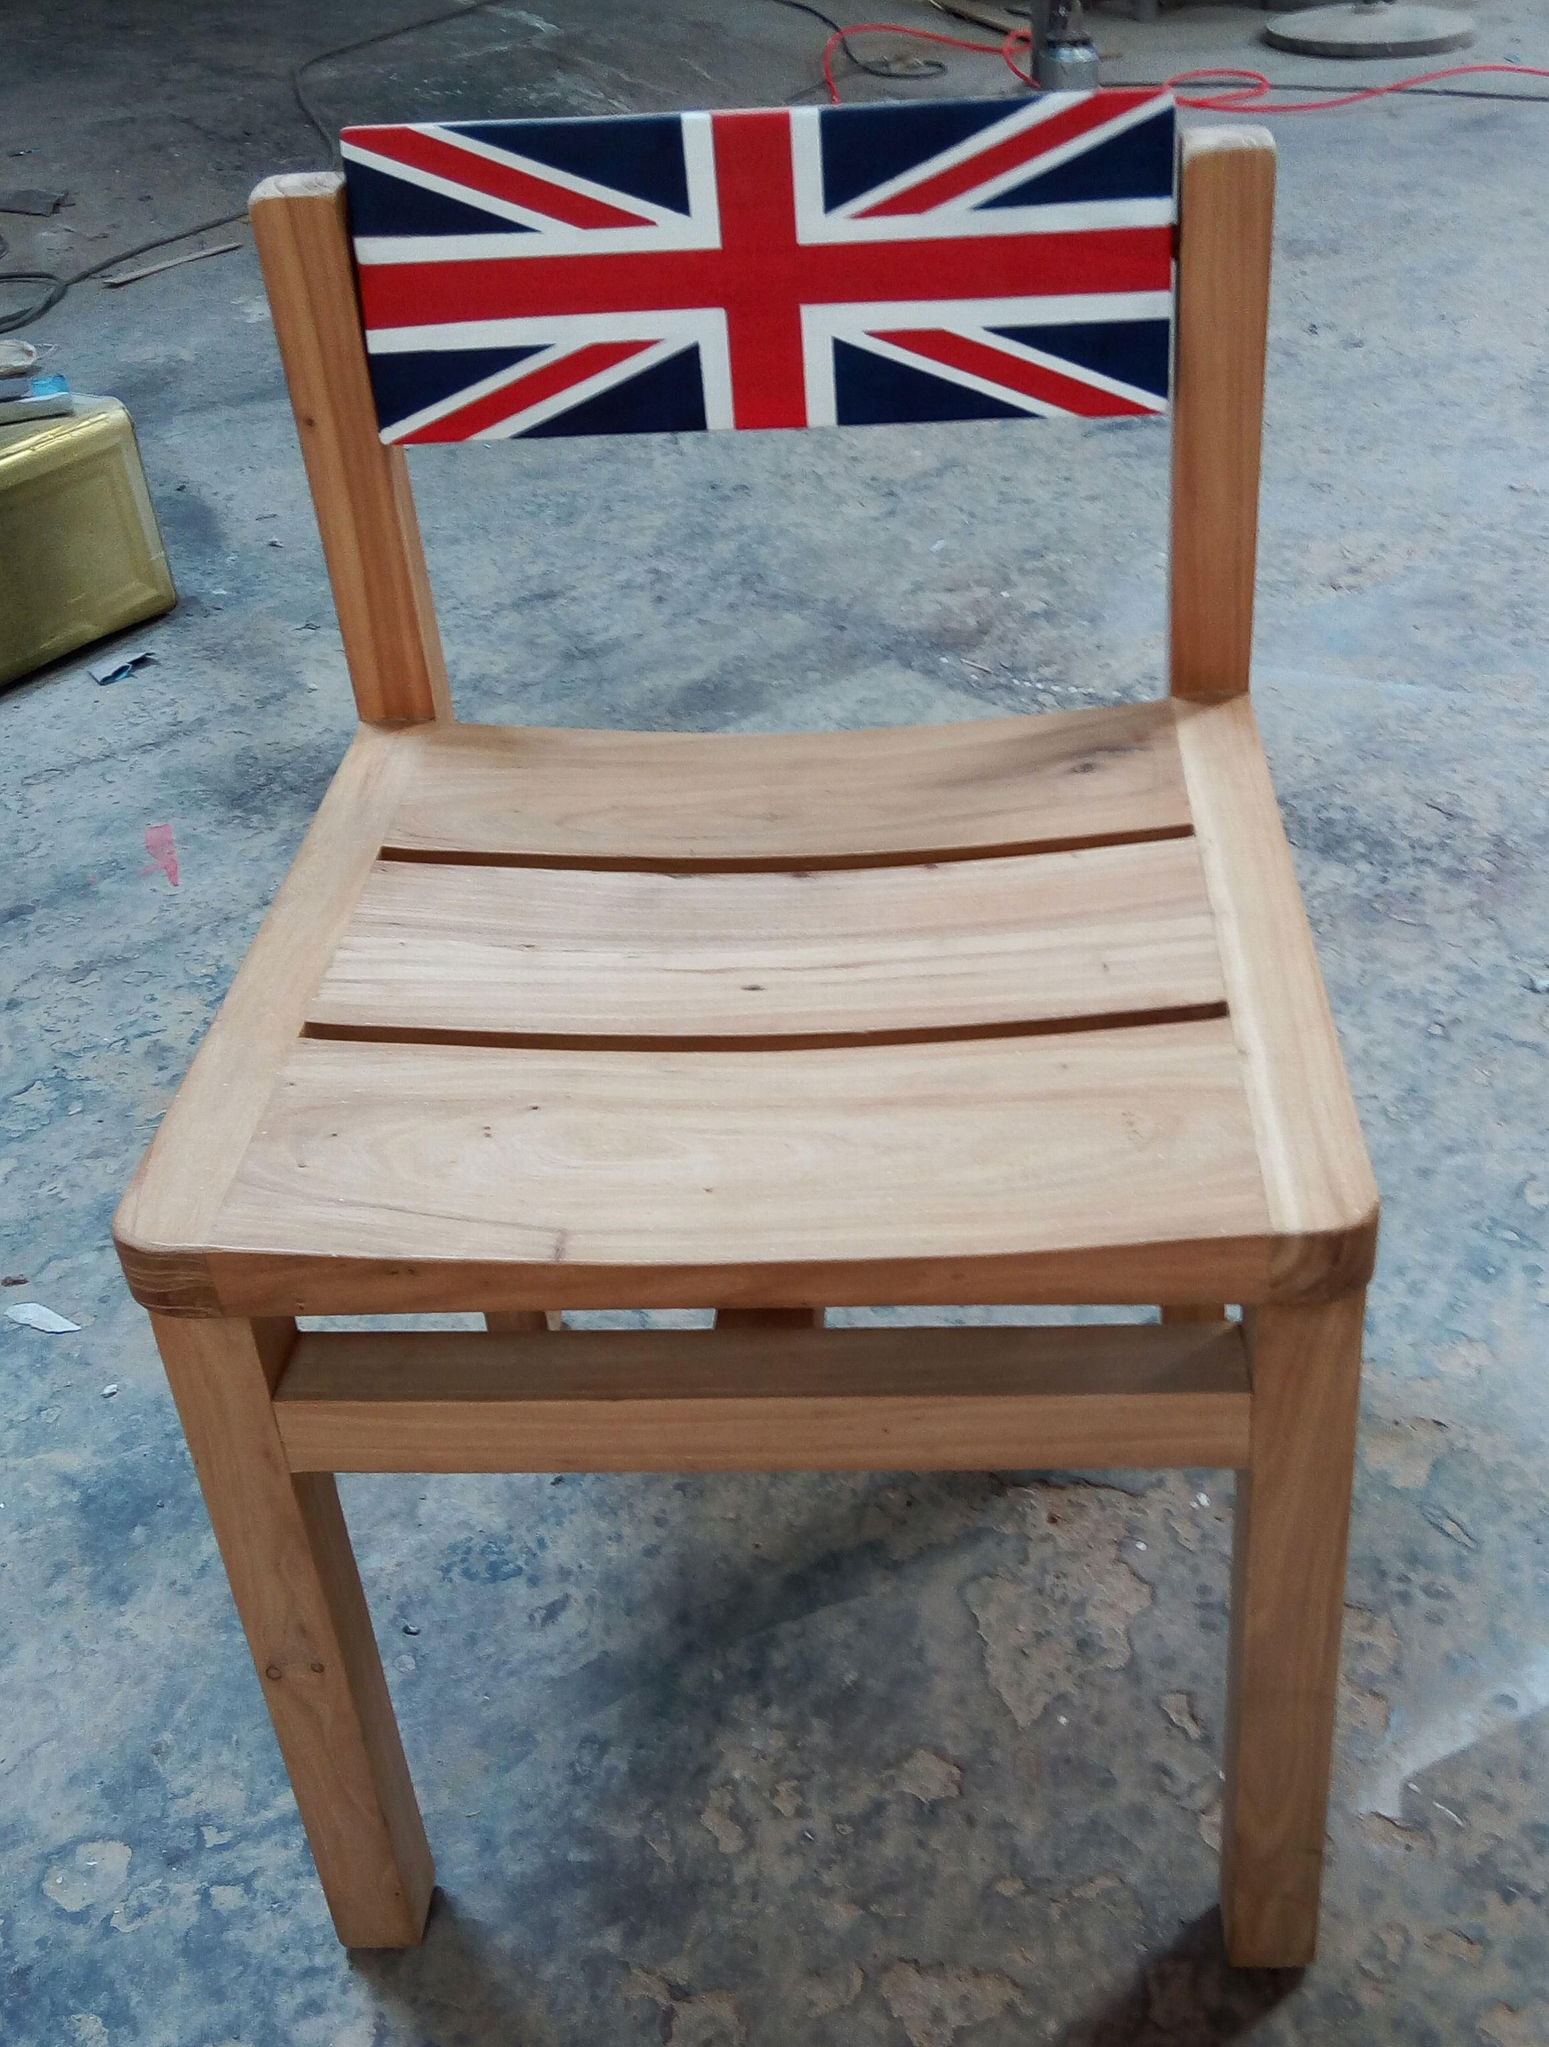 elmwood chair,back turning around with England flag design